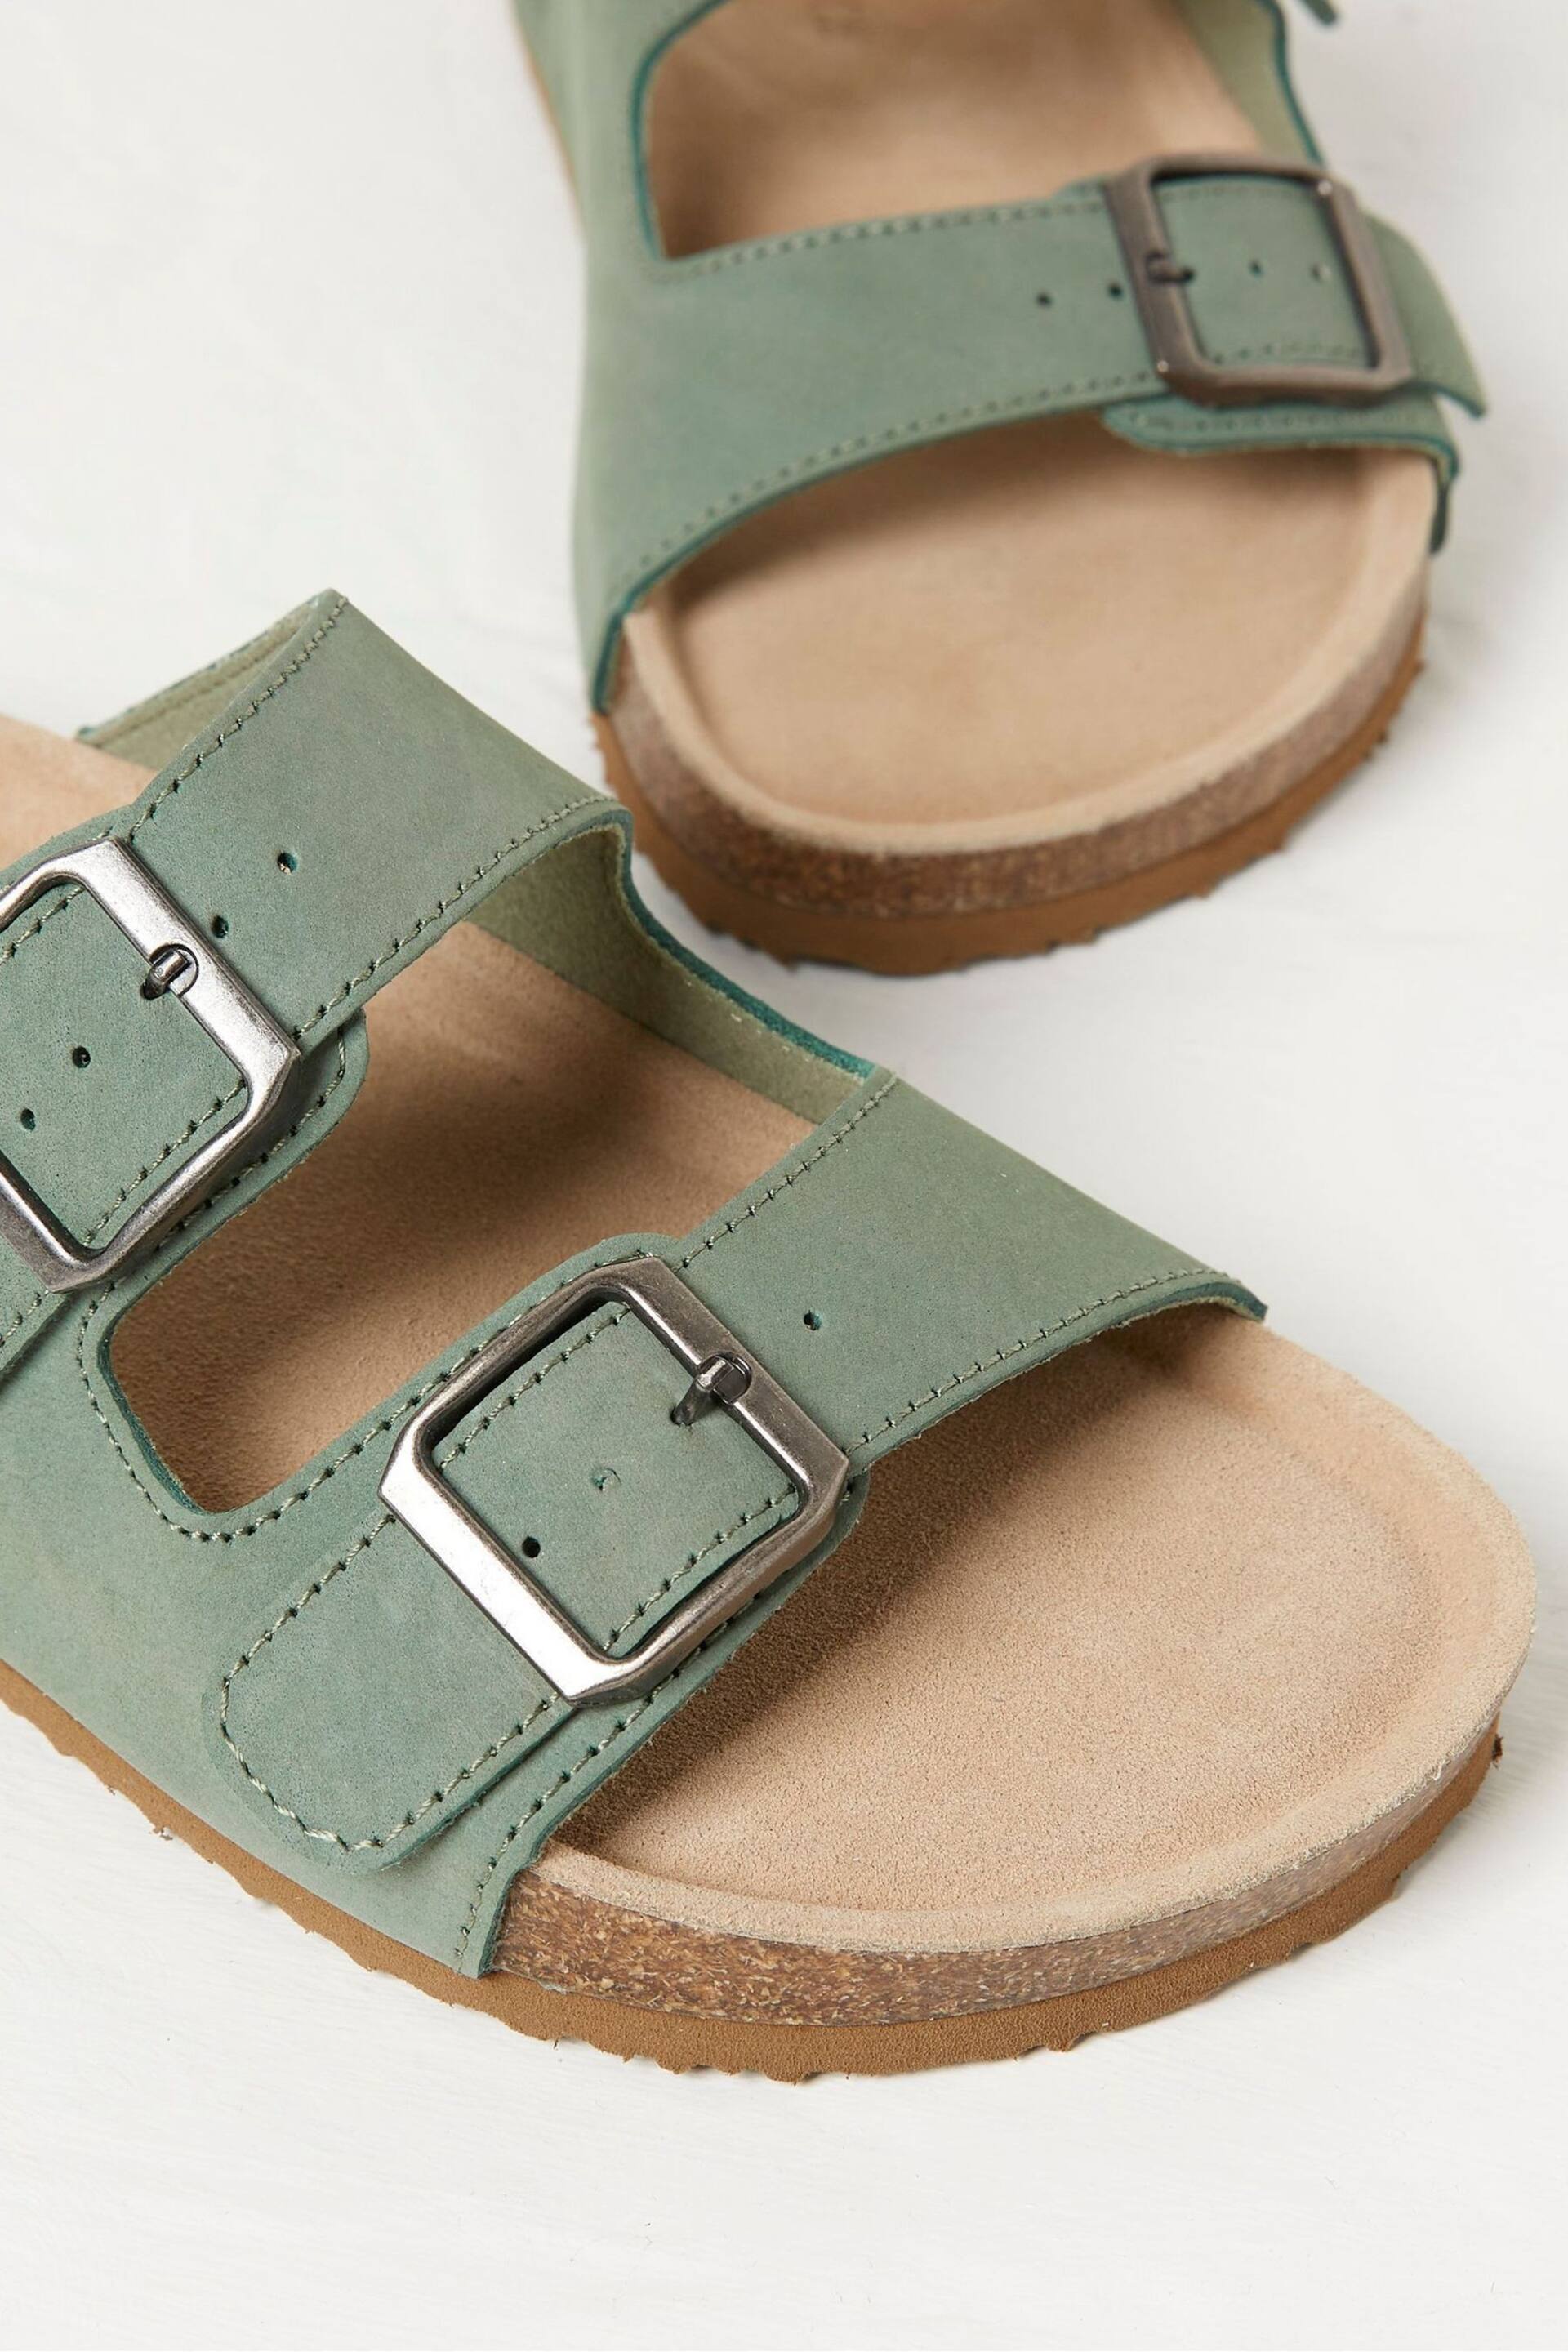 FatFace Green Meldon Footbed Sandals - Image 3 of 3